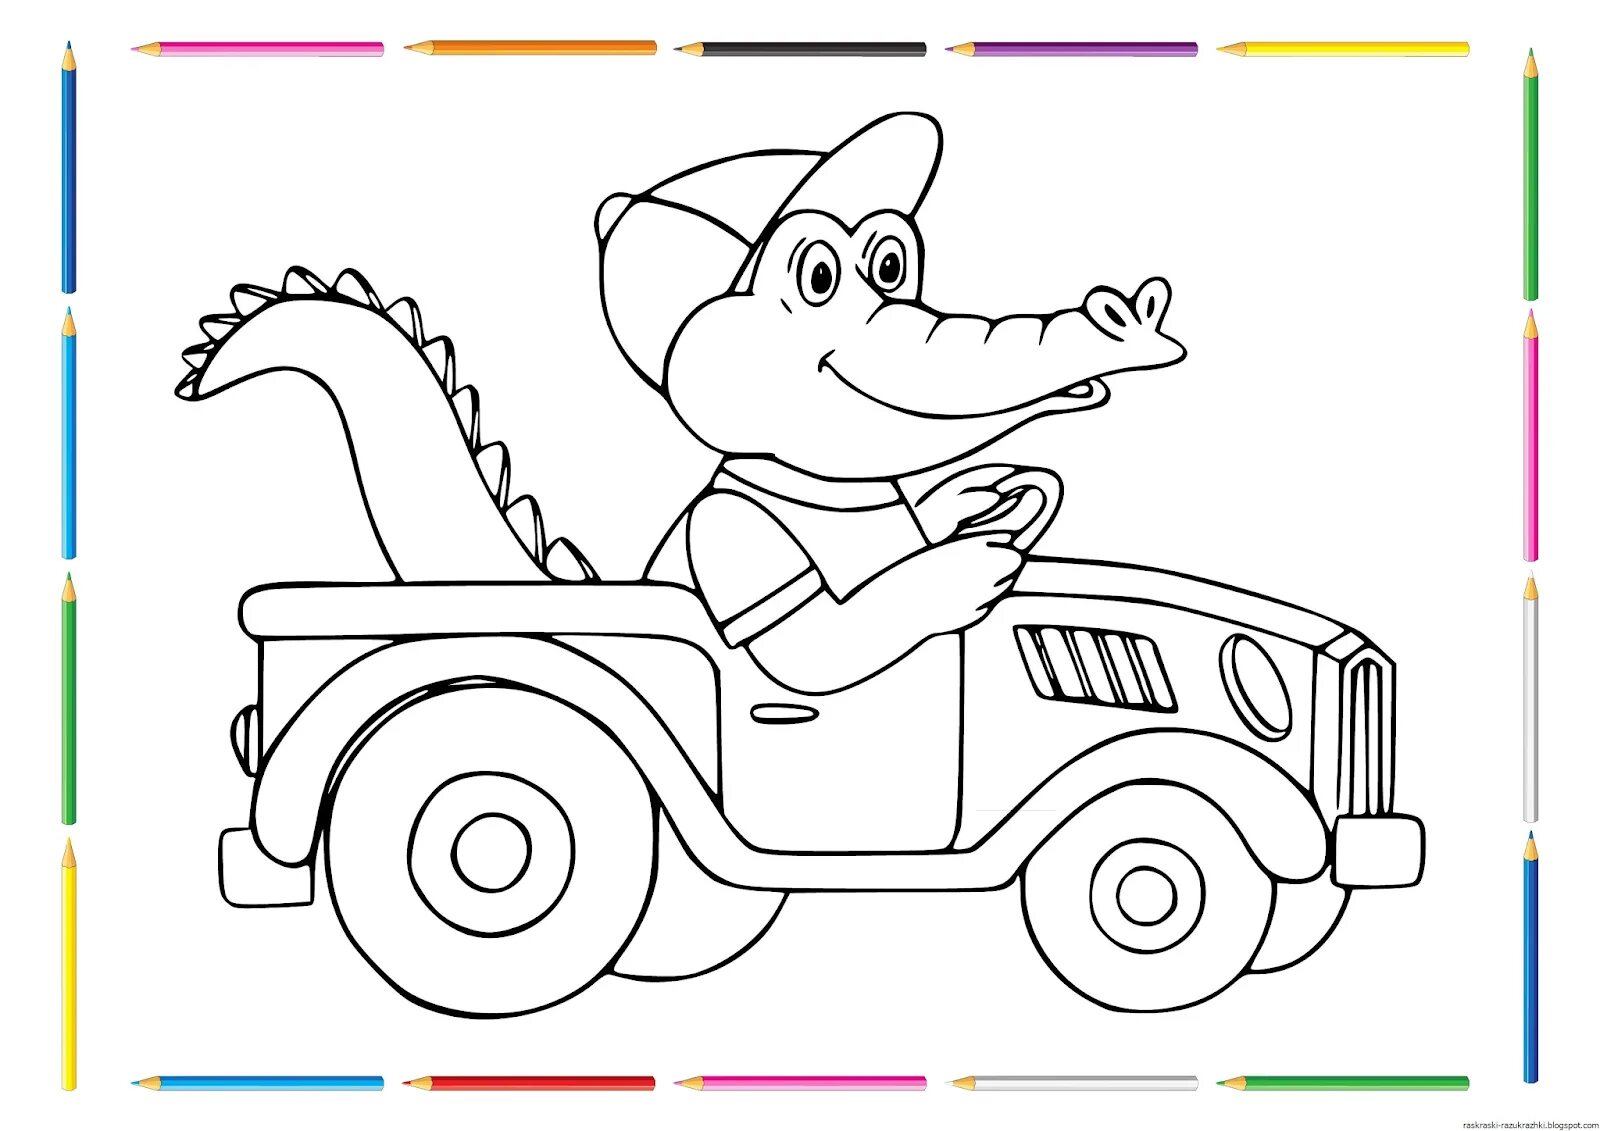 Incredible car coloring book for 4 year olds